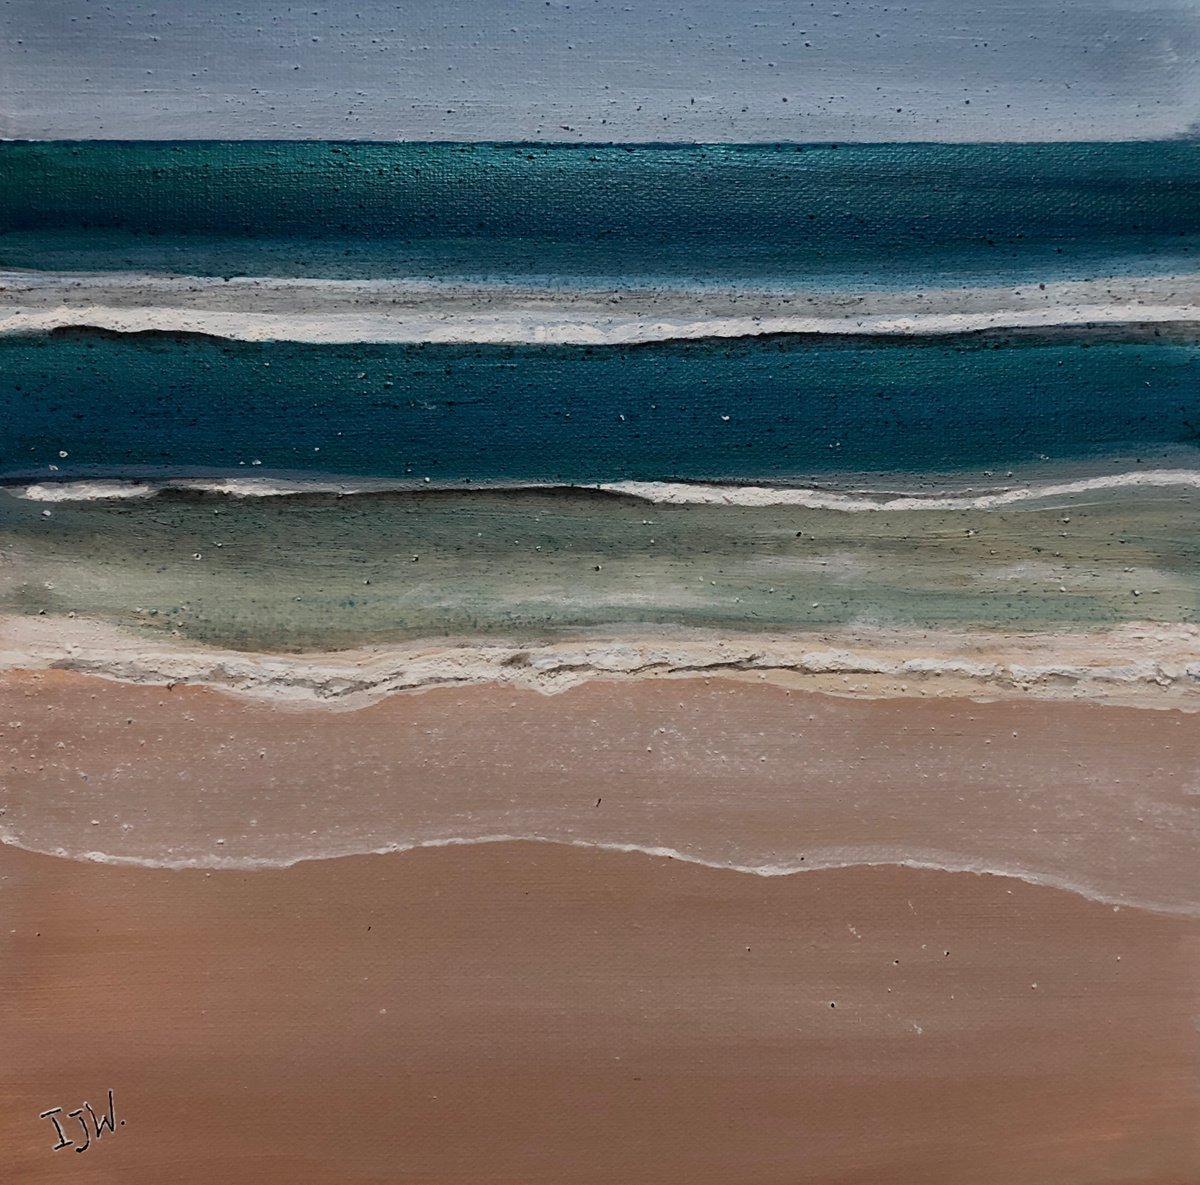 Sand and Surf by Ian Walder